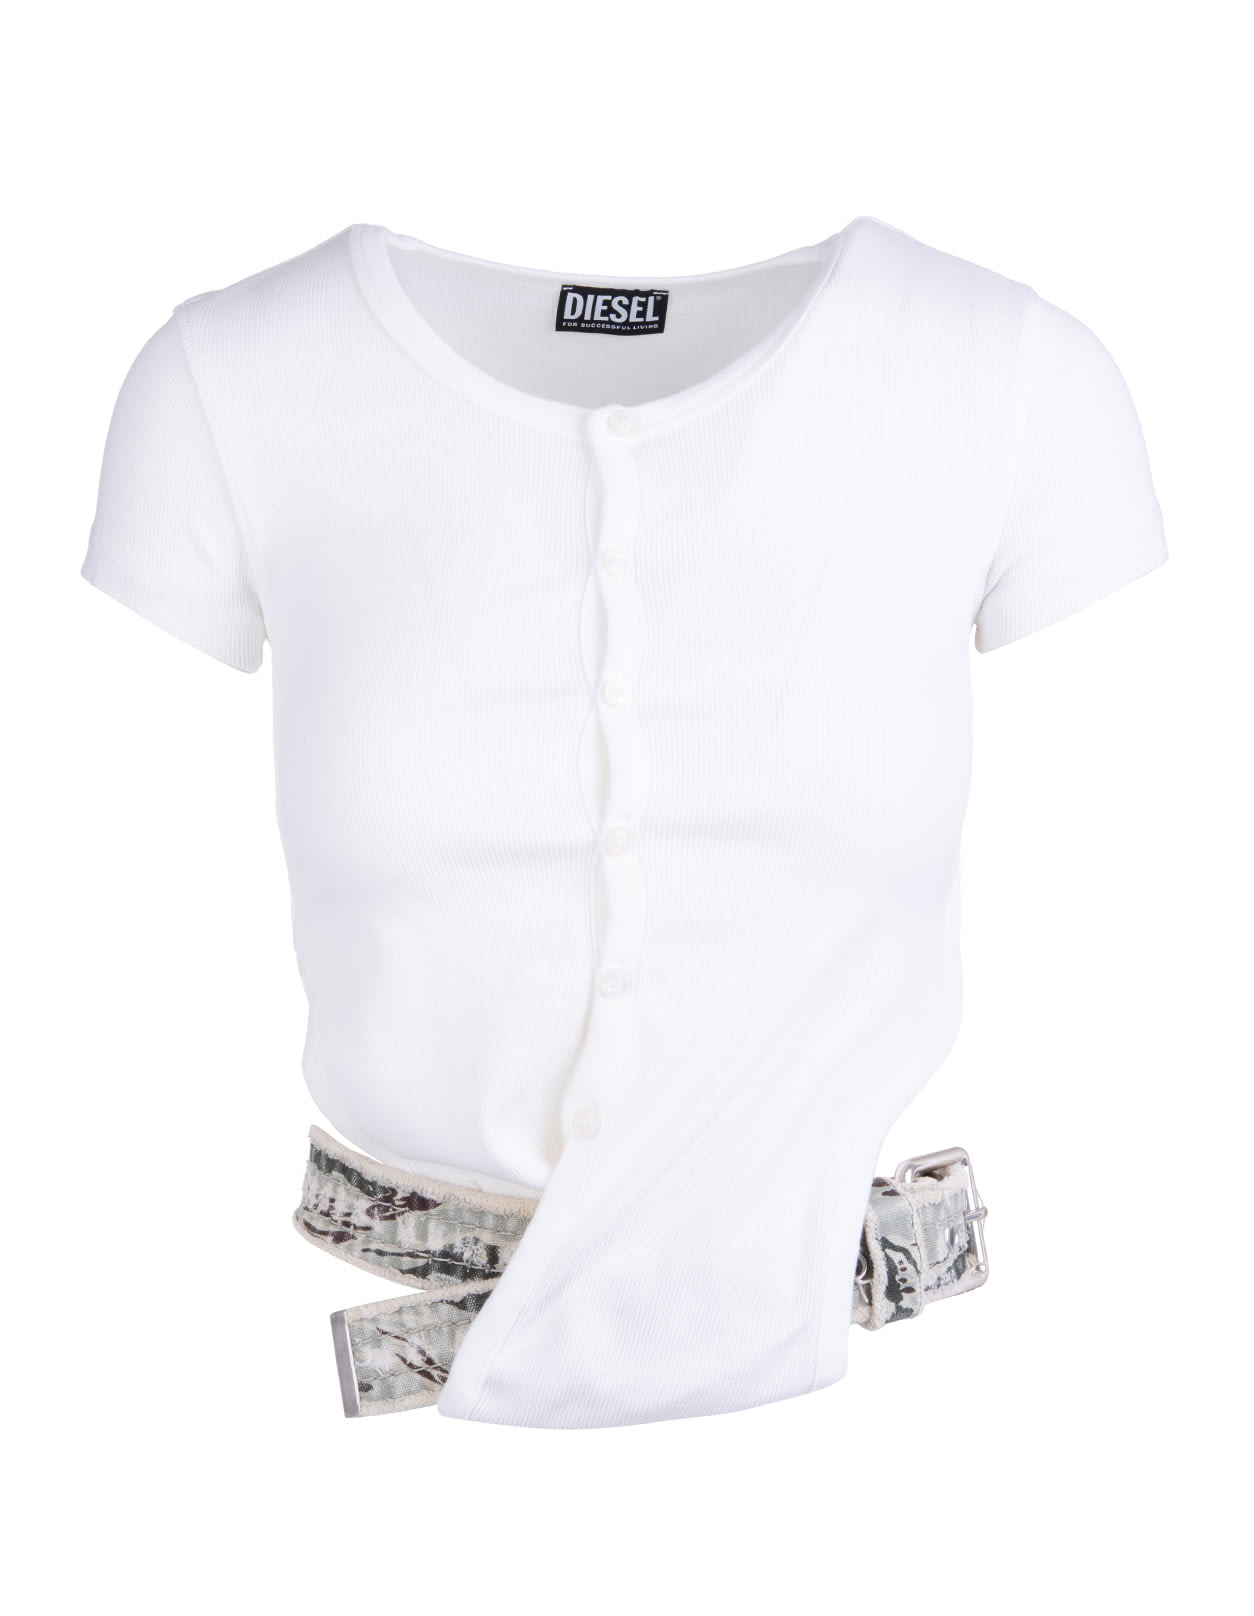 Diesel Woman White Top With Removable Camouflage Belt